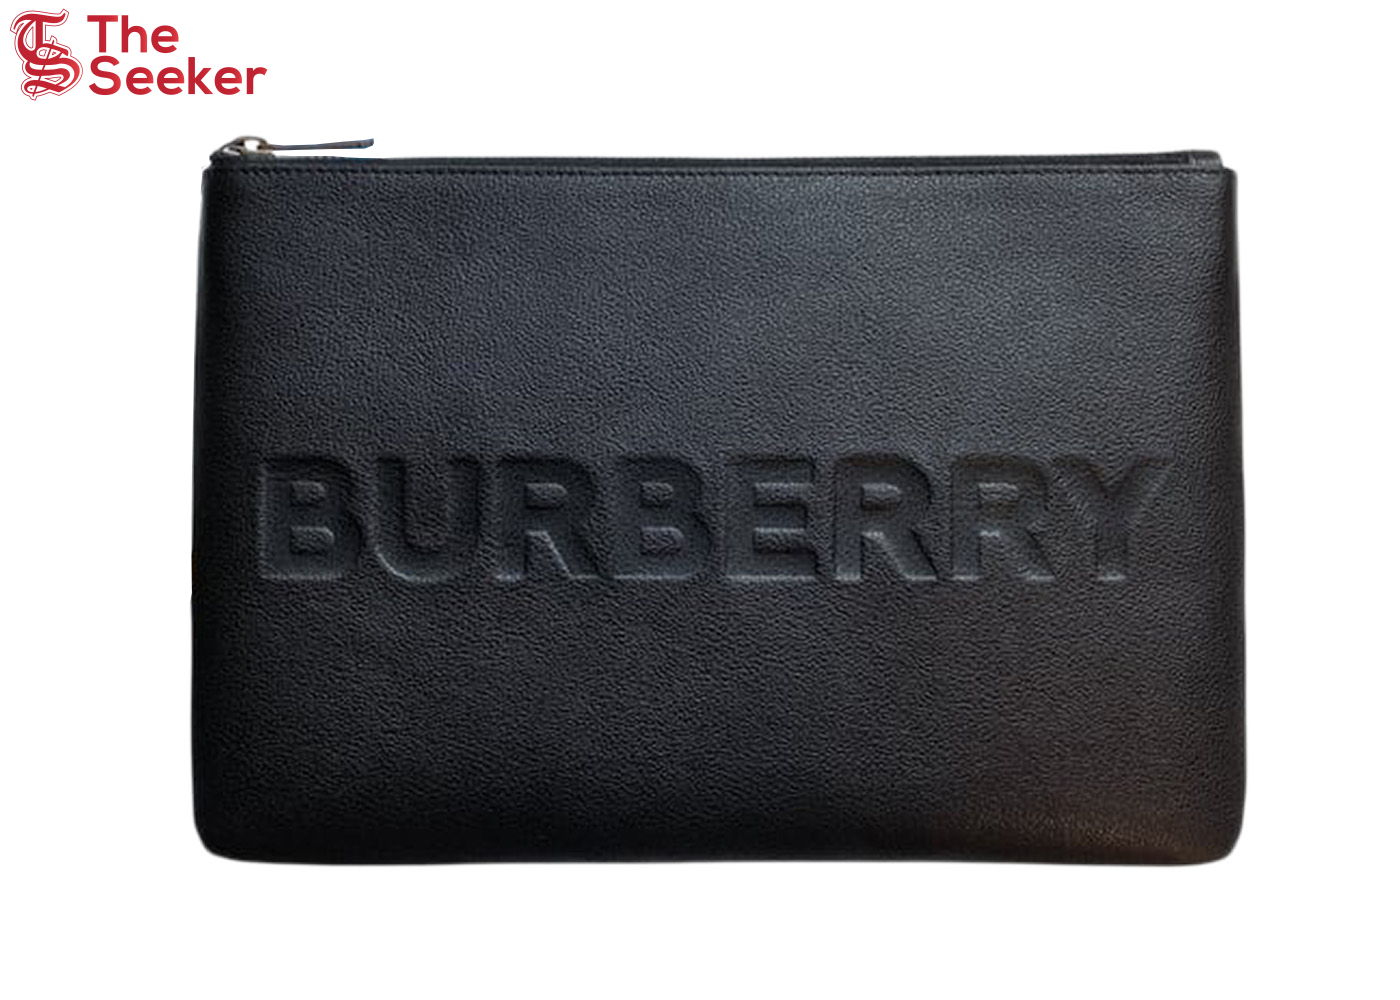 Burberry Embossed Leather Pouch Black